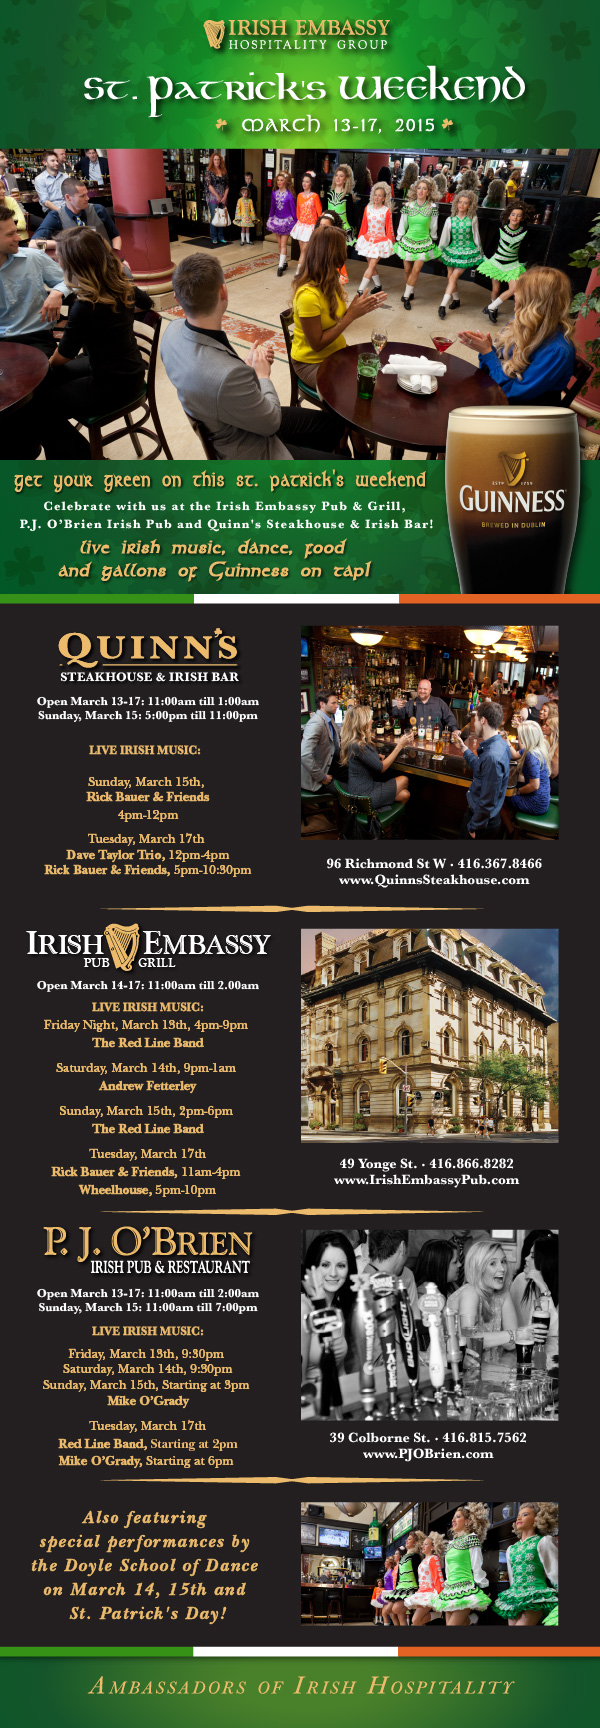 
			 
IRISH EMBASSY HOSPITALITY GROUP

ST. PATRICK'S WEEKEND

MARCH 13-17, 2015

Get your green on this St. Patrick's Weekend.

Celebrate with us at the Irish Embassy Pub & Grill, 
P.J. O'Brien Irish Pub and Quinn's Steakhouse & Irish Bar!

Live irish music, dance, food and gallons of Guinness on tap!


- - - - - - - - - - - - - - - - - - - - - - - - - - - - - - - - - - - - 


QUINN'S STEAKHOUSE & IRISH BAR

96 Richmond St W - 416.367.8466
www.QuinnsSteakhouse.com
Open March 13-17: 11:00am till 1:00am
Sunday, March 15: 5:00pm till 11:00pm

LIVE IRISH MUSIC - FEATURING:

Sunday, March 15th
Rick Bauer & Friends
4pm-12pm

Tuesday, March 17th 
Dave Taylor Trio
12pm-4pm
Rick Bauer & Friends
5pm-10:30pm

- - - - - - - - - - - - - - - - - - - - - - - - - - - - - - - - - - - - 


IRISH EMBASSY PUB & GRILL

49 Yonge St. - 416.866.8282
www.IrishEmbassyPub.com
Open March 13-17: 11:00am till 2:00am

LIVE IRISH MUSIC - FEATURING:

Friday Night, March 13th, 4pm-9pm 
The Red Line Band

Saturday, March 14th, 9pm-1am 
Andrew Fetterley

Sunday, March 15th, 2pm-6pm 
The Red Line Band

Tuesday, March 17th
Rick Bauer & Friends, 11am-4pm 
Wheelhouse, 5pm-10pm 
No live music on Monday, March 16th


- - - - - - - - - - - - - - - - - - - - - - - - - - - - - - - - - - - - 

P.J. O'BRIEN IRISH PUB & RESTAURANT

39 Colborne St. - 416.815.7562
www.PJOBrien.com
Open March 13-17: 11:00am till 2:00am
Sunday, March 15: 11:00am till 7:00pm

LIVE IRISH MUSIC - FEATURING:

Friday, March 13th, 9:30pm 
Mike O'Grady

Saturday, March 14th, 9:30pm
Mike O'Grady

Sunday, March 15th, Starting at 3pm 
Mike O'Grady

Tuesday, March 17th
Red Line Band, Starting at 2pm
Mike O'Grady, Starting at 6pm 


- - - - - - - - - - - - - - - - - - - - - - - - - - - - - - - - - - - - 

Also featuring special performances by 
the Doyle School of Dance on 
March 14, 15th and St. Patrick's Day!

- - - - - - - - - - - - - - - - - - - - - - - - - - - - - - - - - - - - 

Ambassadors of Irish Hospitality


		